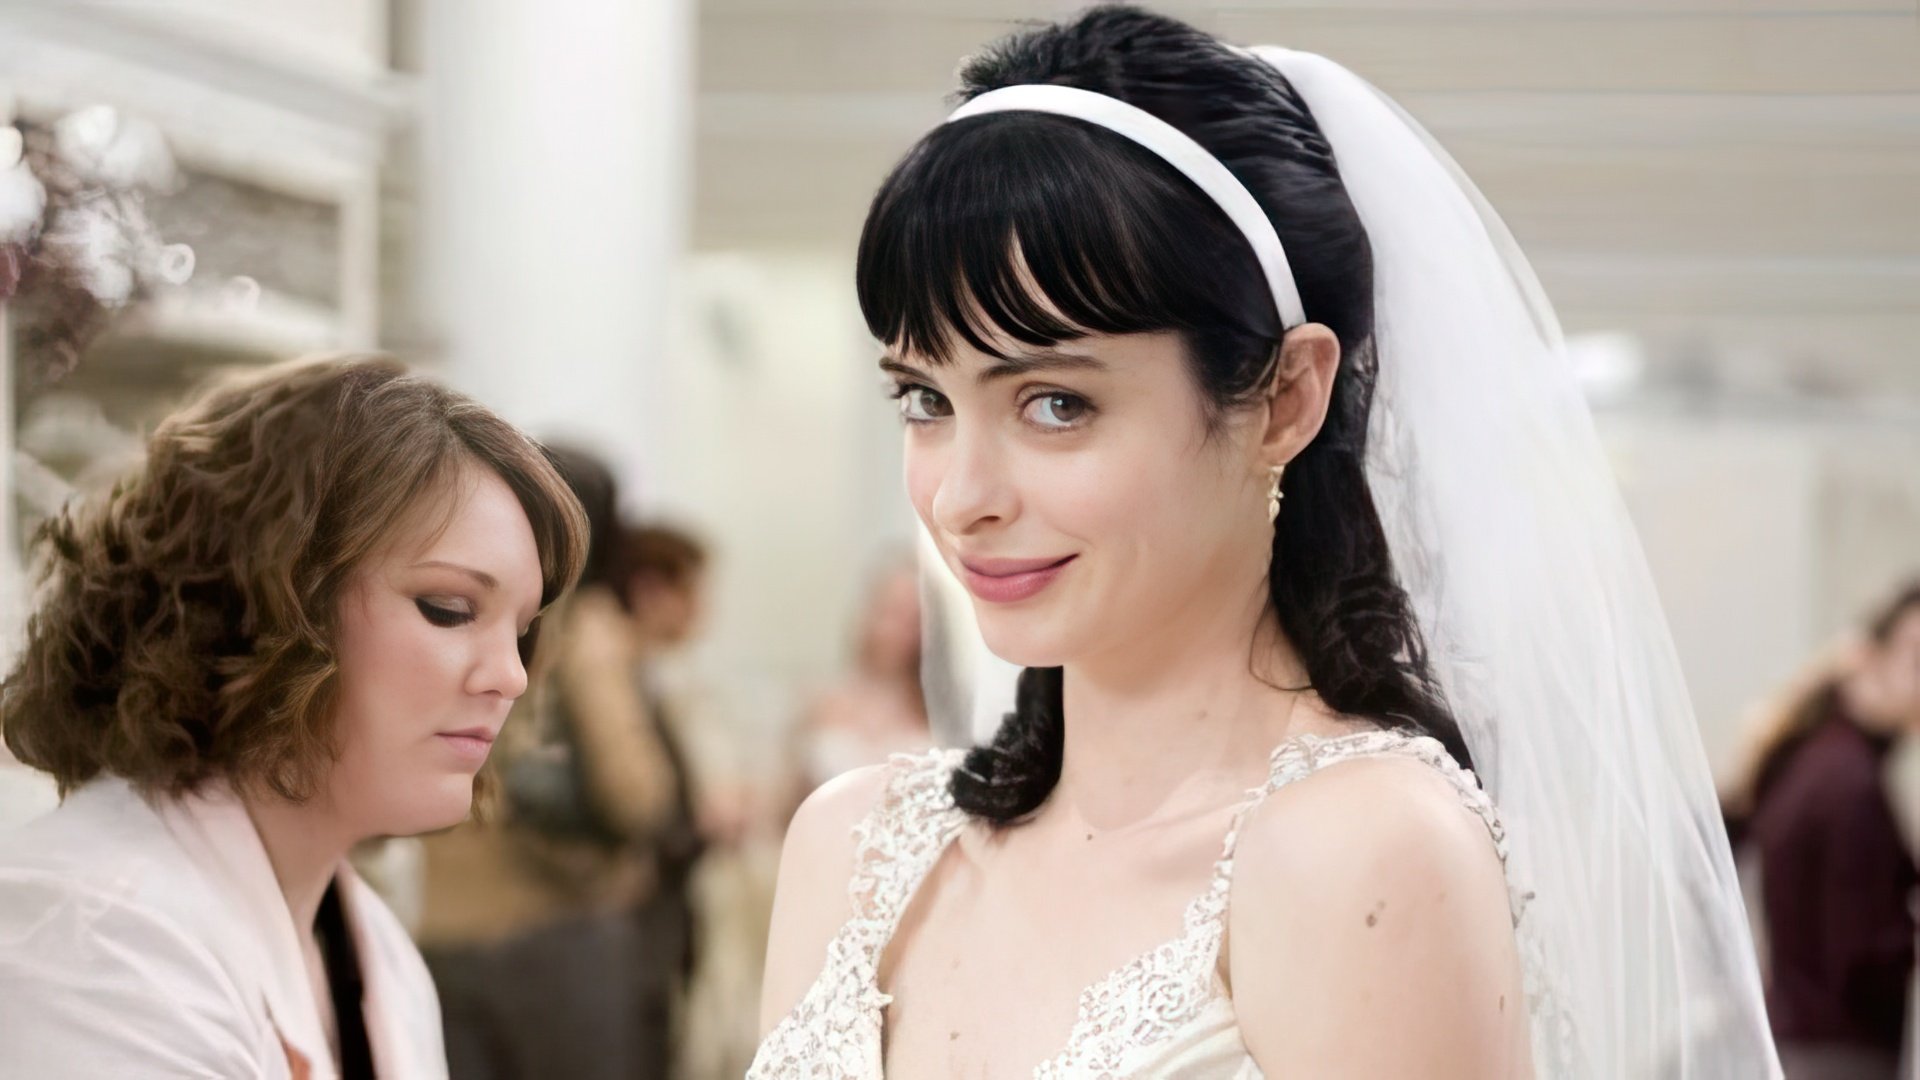 Krysten Ritter in 'Confessions of a Shopaholic'